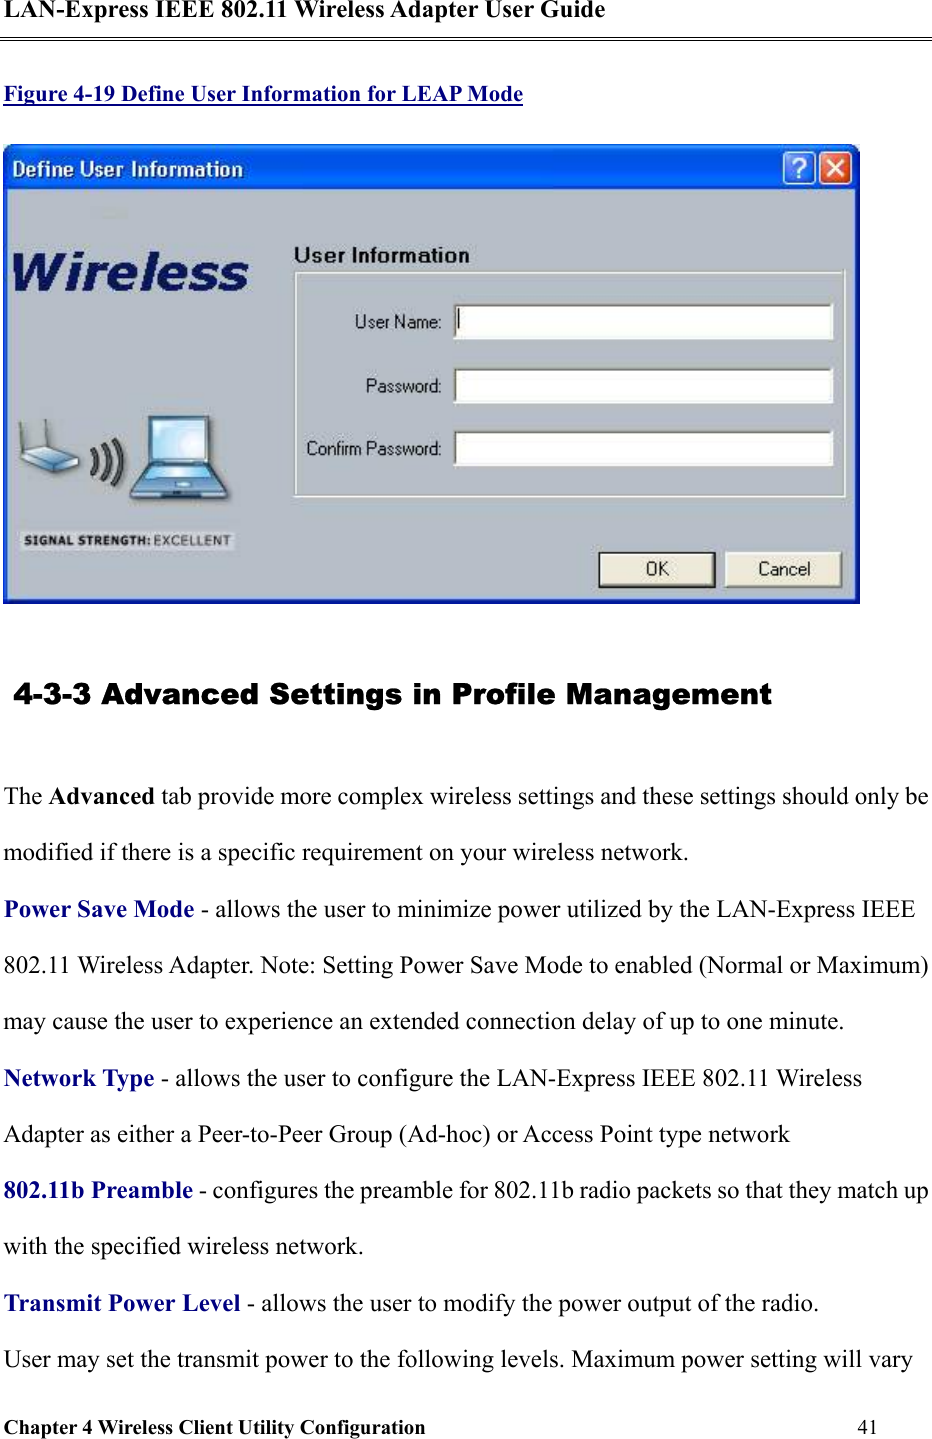 LAN-Express IEEE 802.11 Wireless Adapter User Guide Chapter 4 Wireless Client Utility Configuration   41  Figure 4-19 Define User Information for LEAP Mode   4-3-3 Advanced Settings in Profile Management The Advanced tab provide more complex wireless settings and these settings should only be modified if there is a specific requirement on your wireless network.   Power Save Mode - allows the user to minimize power utilized by the LAN-Express IEEE 802.11 Wireless Adapter. Note: Setting Power Save Mode to enabled (Normal or Maximum) may cause the user to experience an extended connection delay of up to one minute. Network Type - allows the user to configure the LAN-Express IEEE 802.11 Wireless Adapter as either a Peer-to-Peer Group (Ad-hoc) or Access Point type network 802.11b Preamble - configures the preamble for 802.11b radio packets so that they match up with the specified wireless network. Transmit Power Level - allows the user to modify the power output of the radio.  User may set the transmit power to the following levels. Maximum power setting will vary 